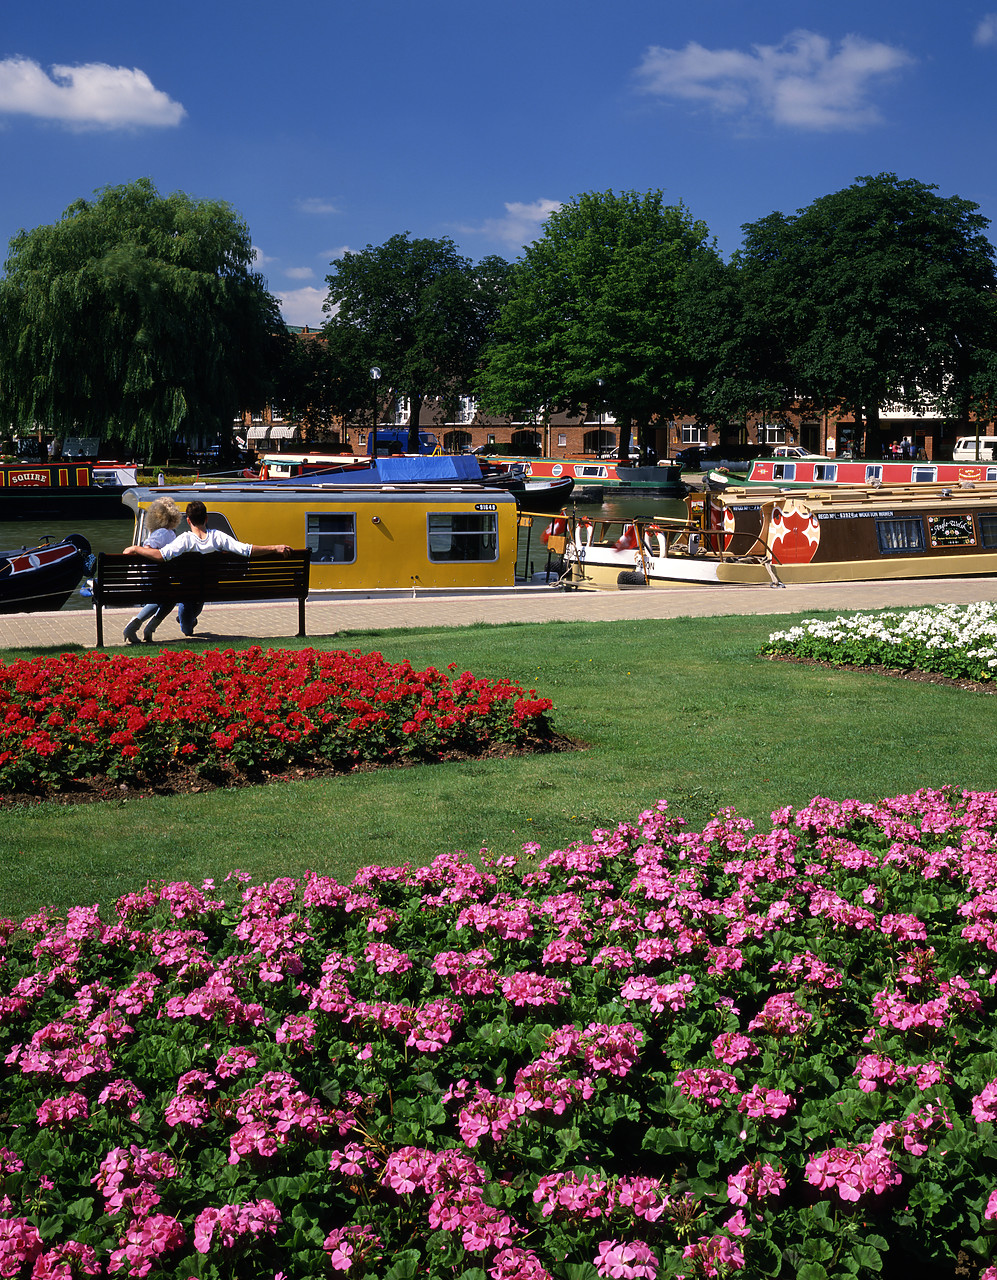 #892339-2 - Flower Beds and Canal Boats, Stratford, Warwickshire, England